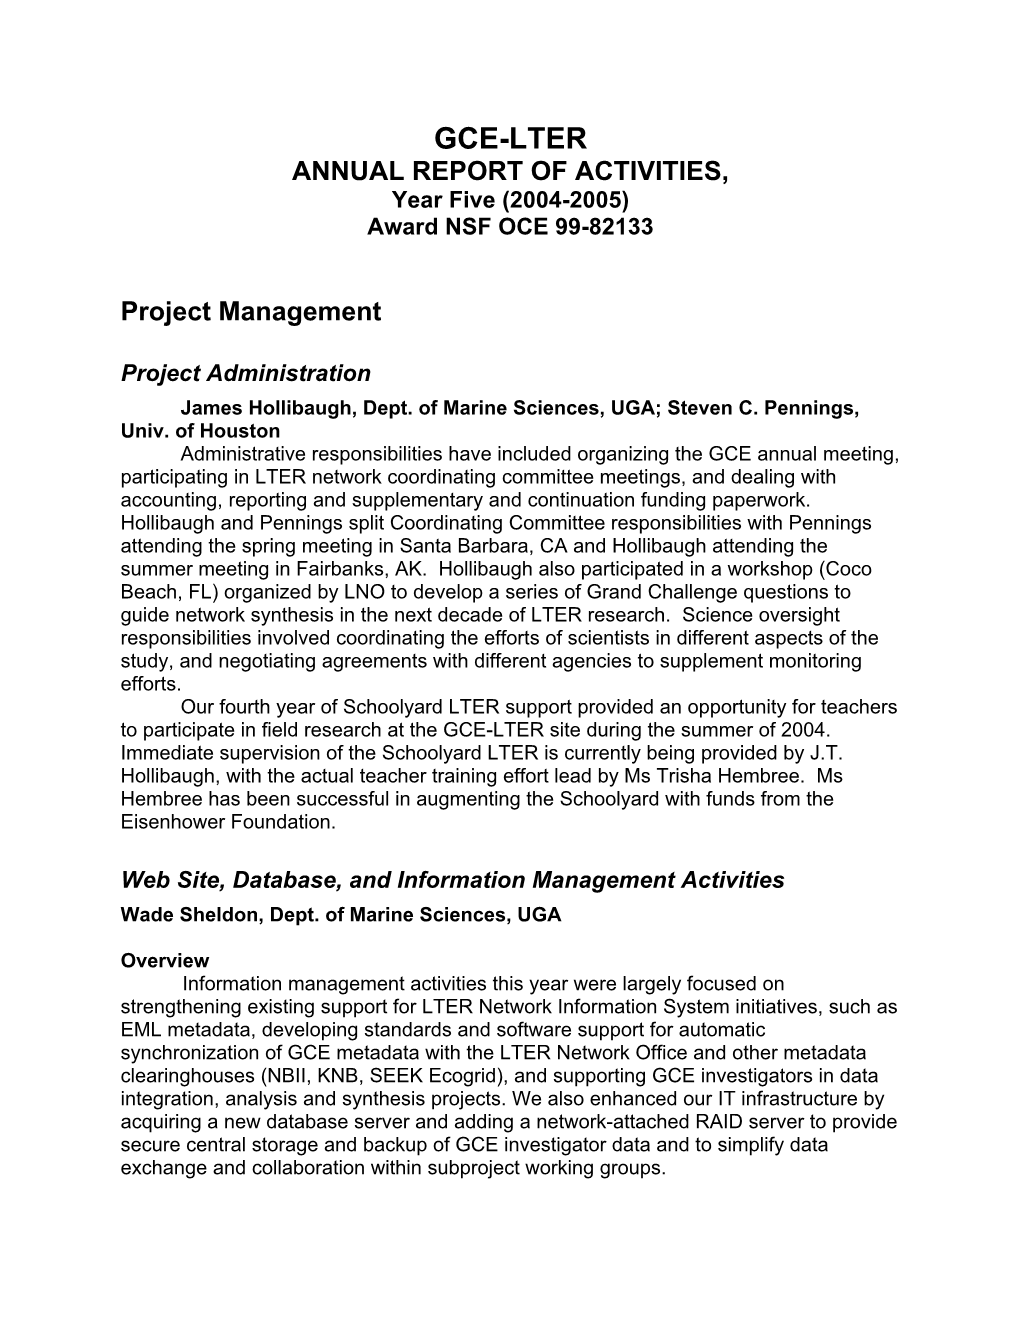 GCE-LTER ANNUAL REPORT of ACTIVITIES, Year Five (2004-2005) Award NSF OCE 99-82133